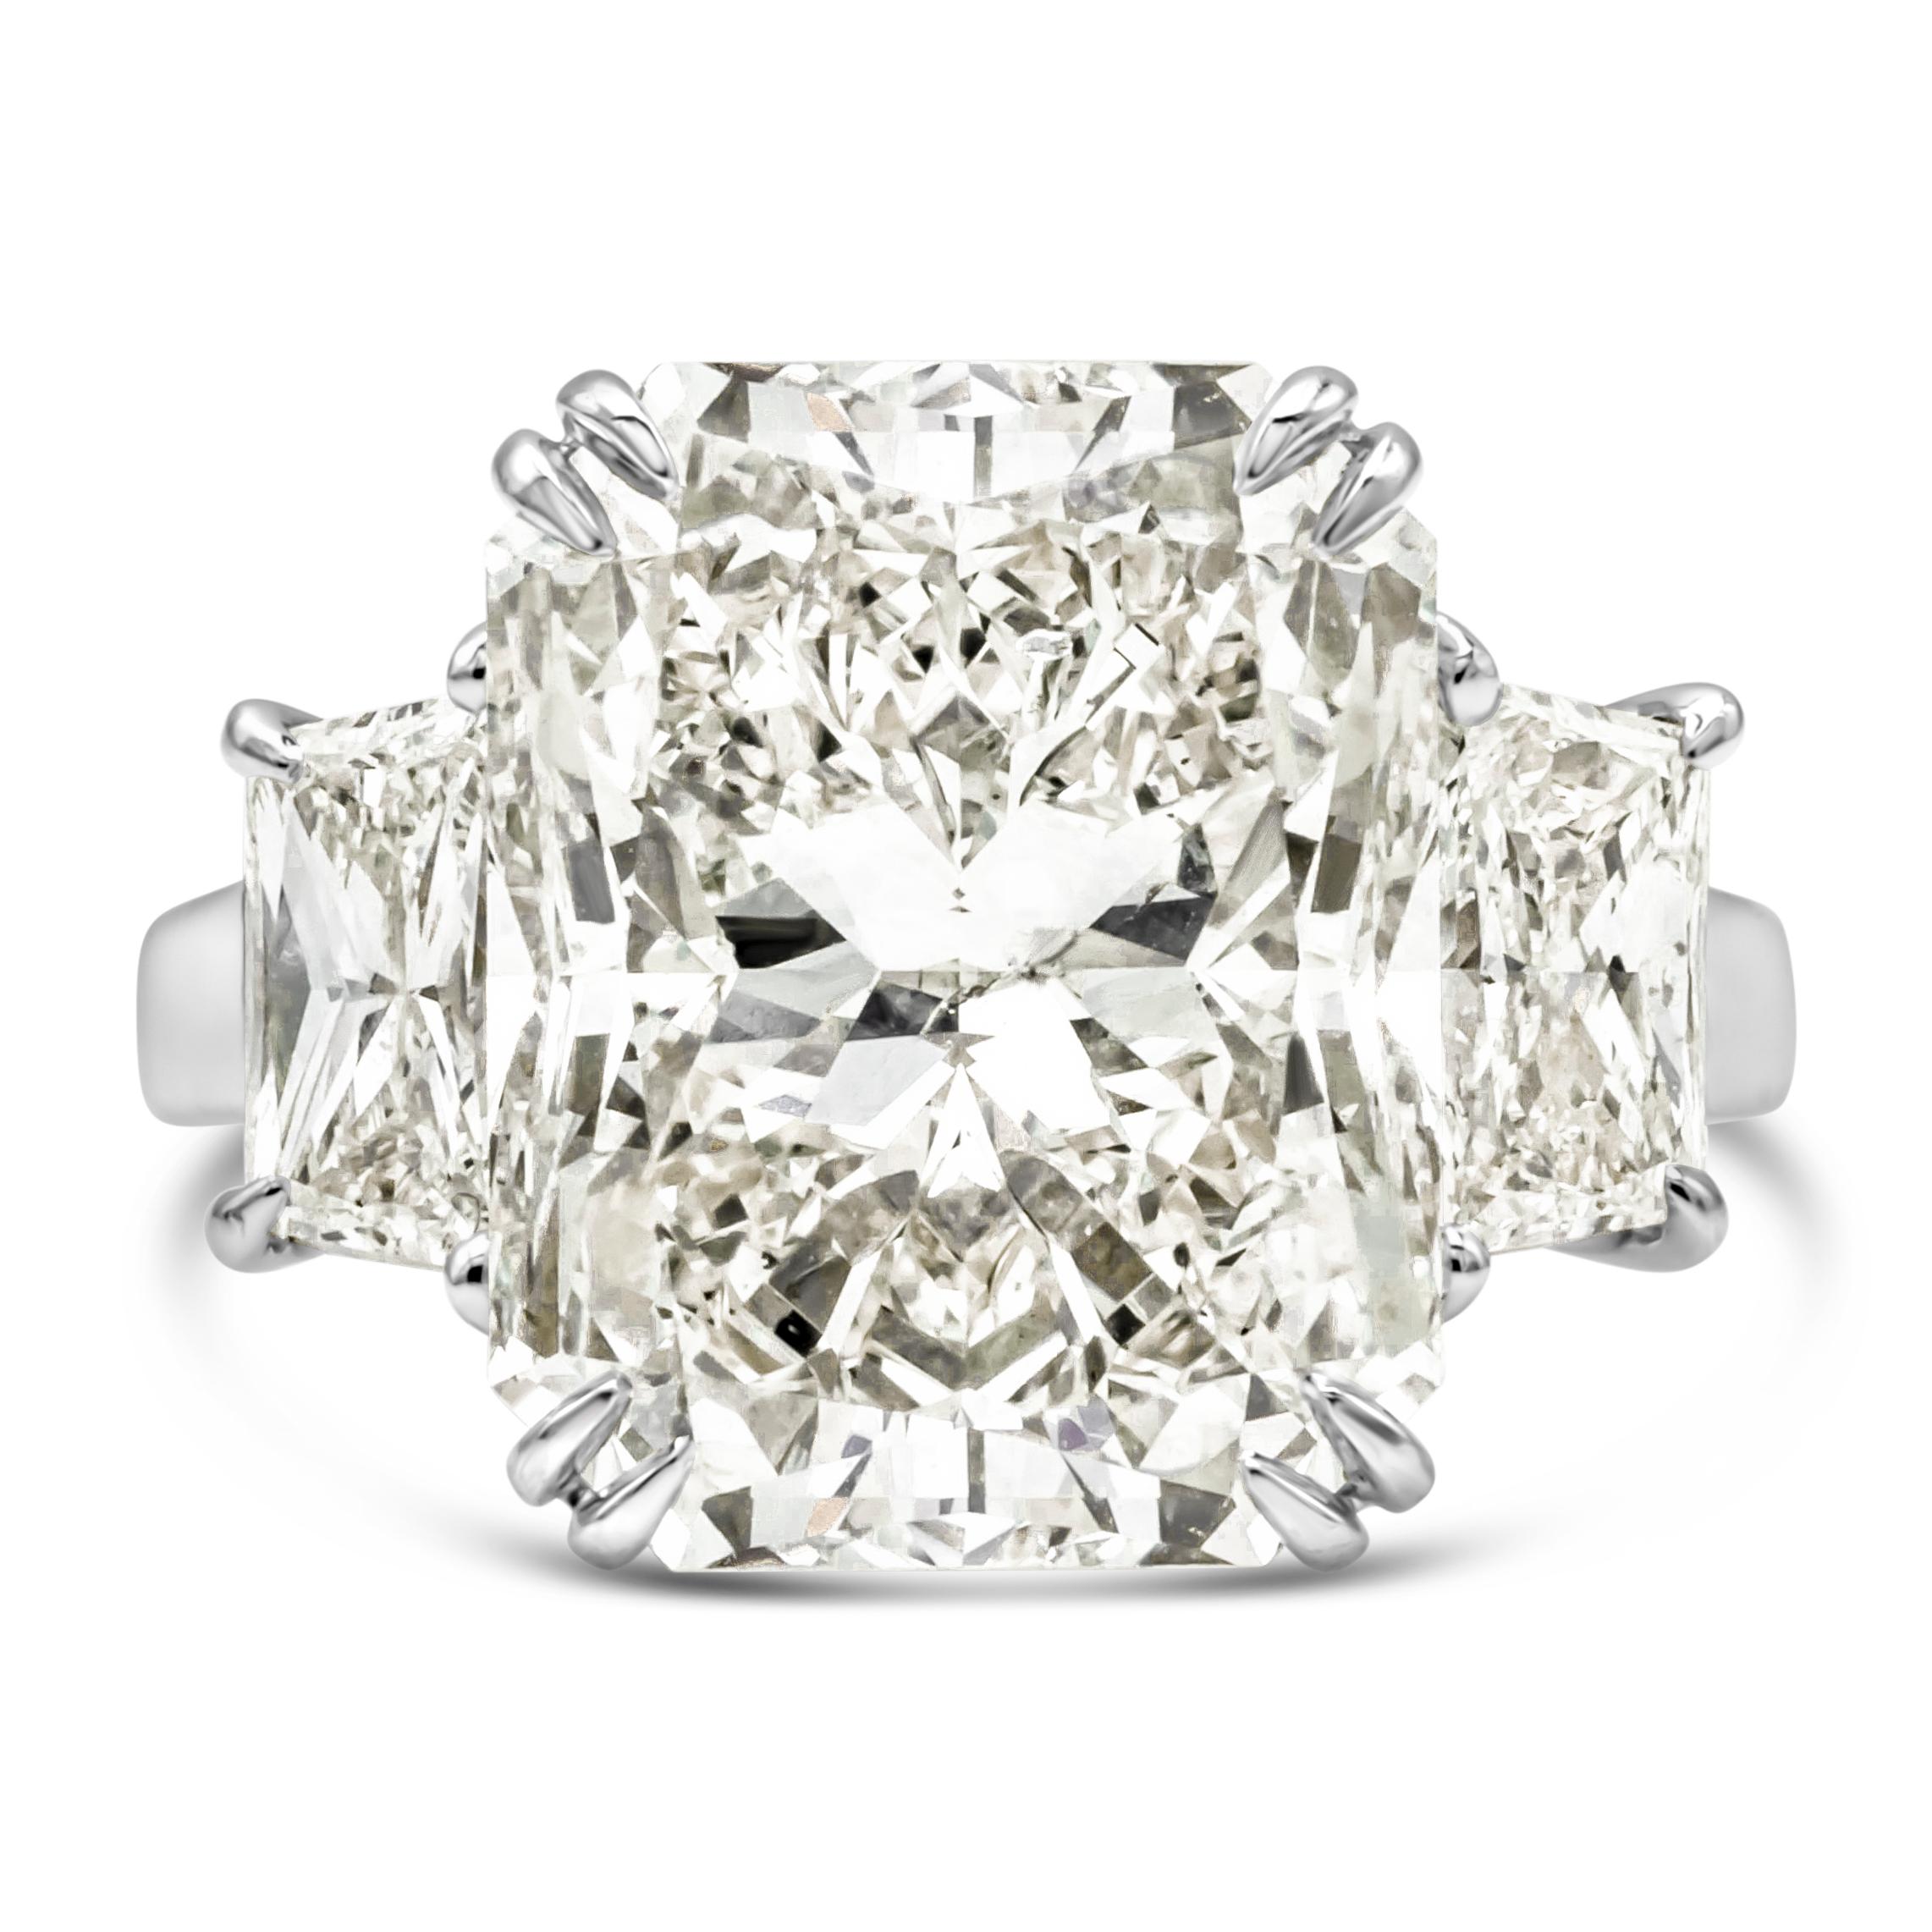 Finely made and well crafted three stone engagement ring featuring a 10.44 carats radiant cut diamond certified by GIA as K color, I1 in clarity, set in a beautiful eight prong basket setting. Flanked by brilliant trillion cut diamonds on each side